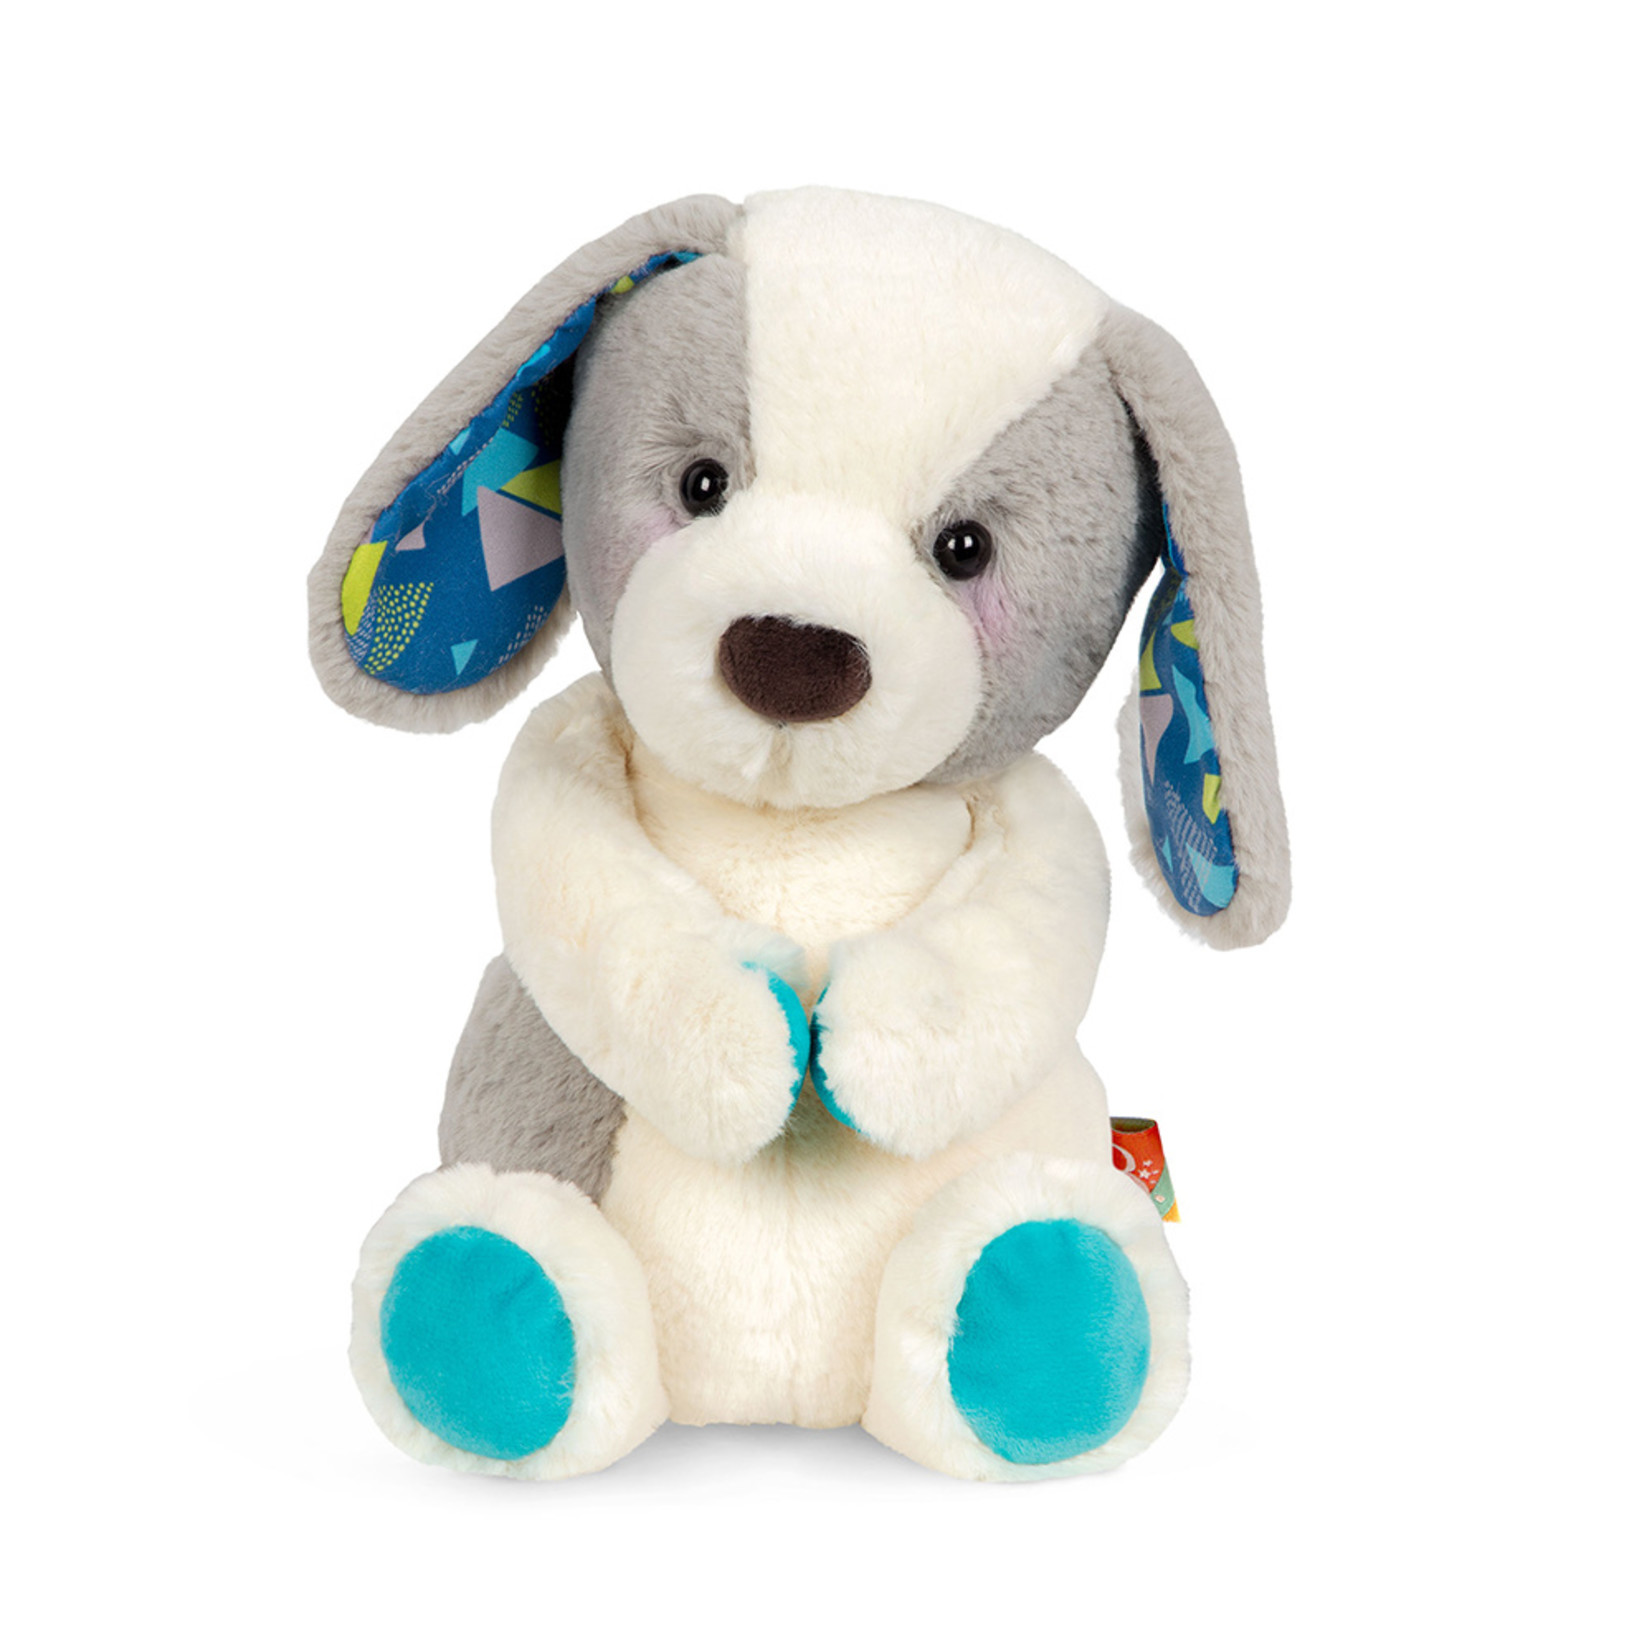 B.Softies B. Softies -Happyhues Peluche Classique Candy Pup